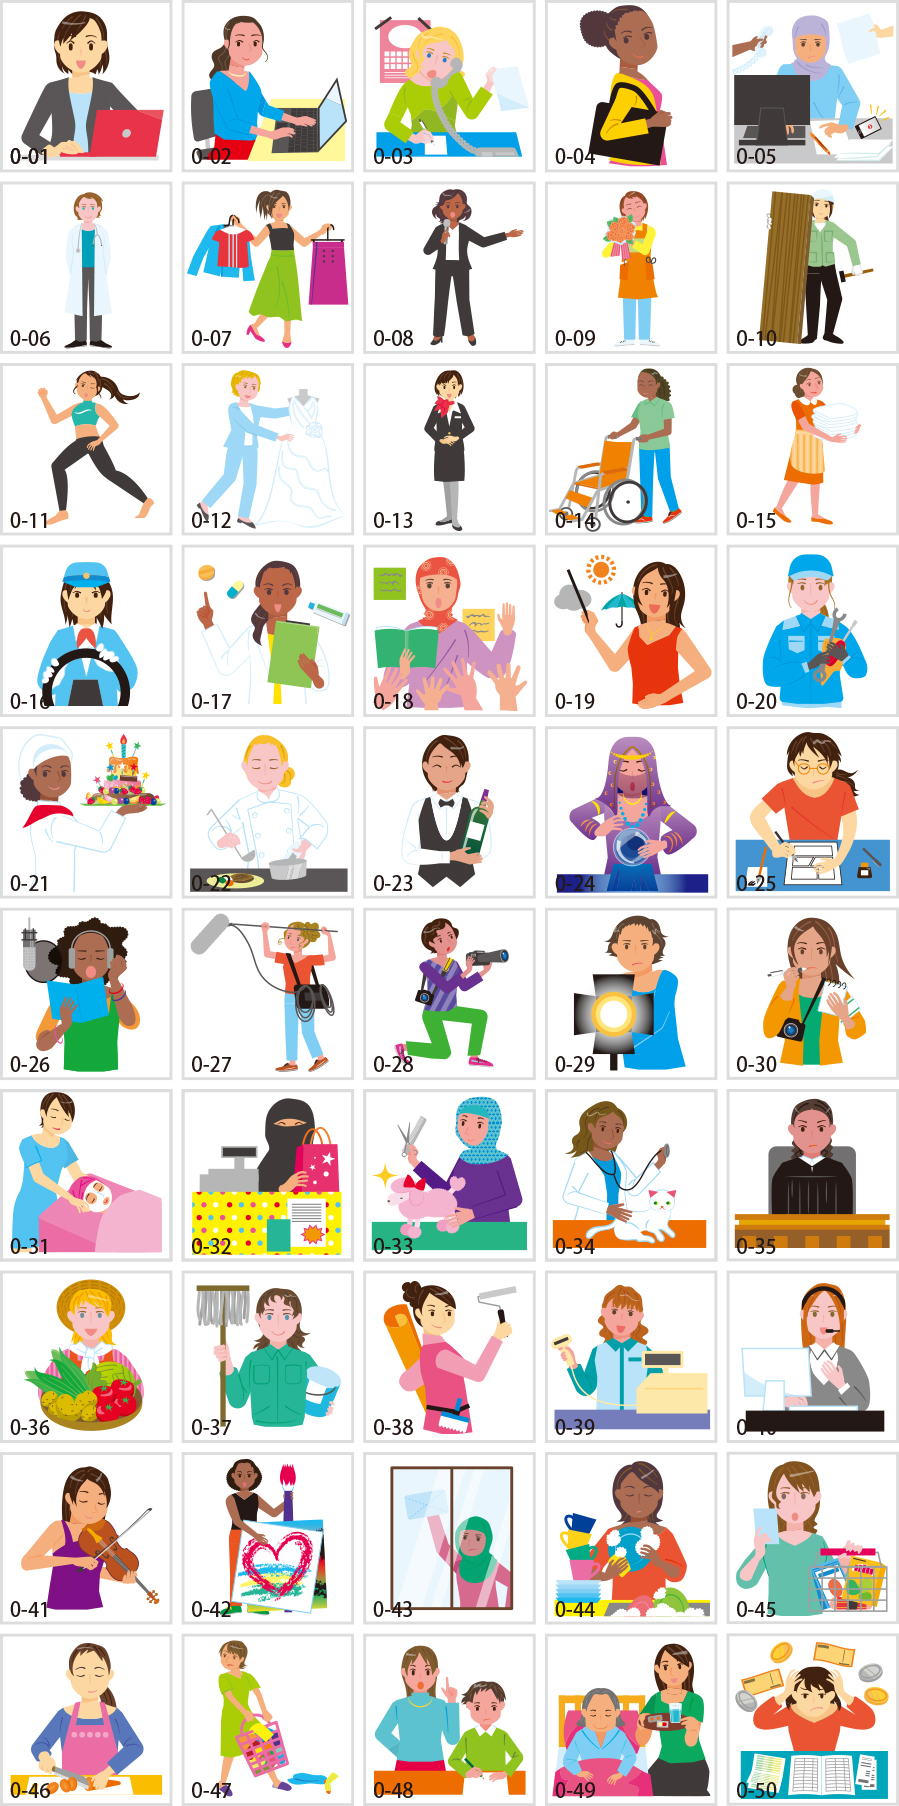 Women in the world working illustrations